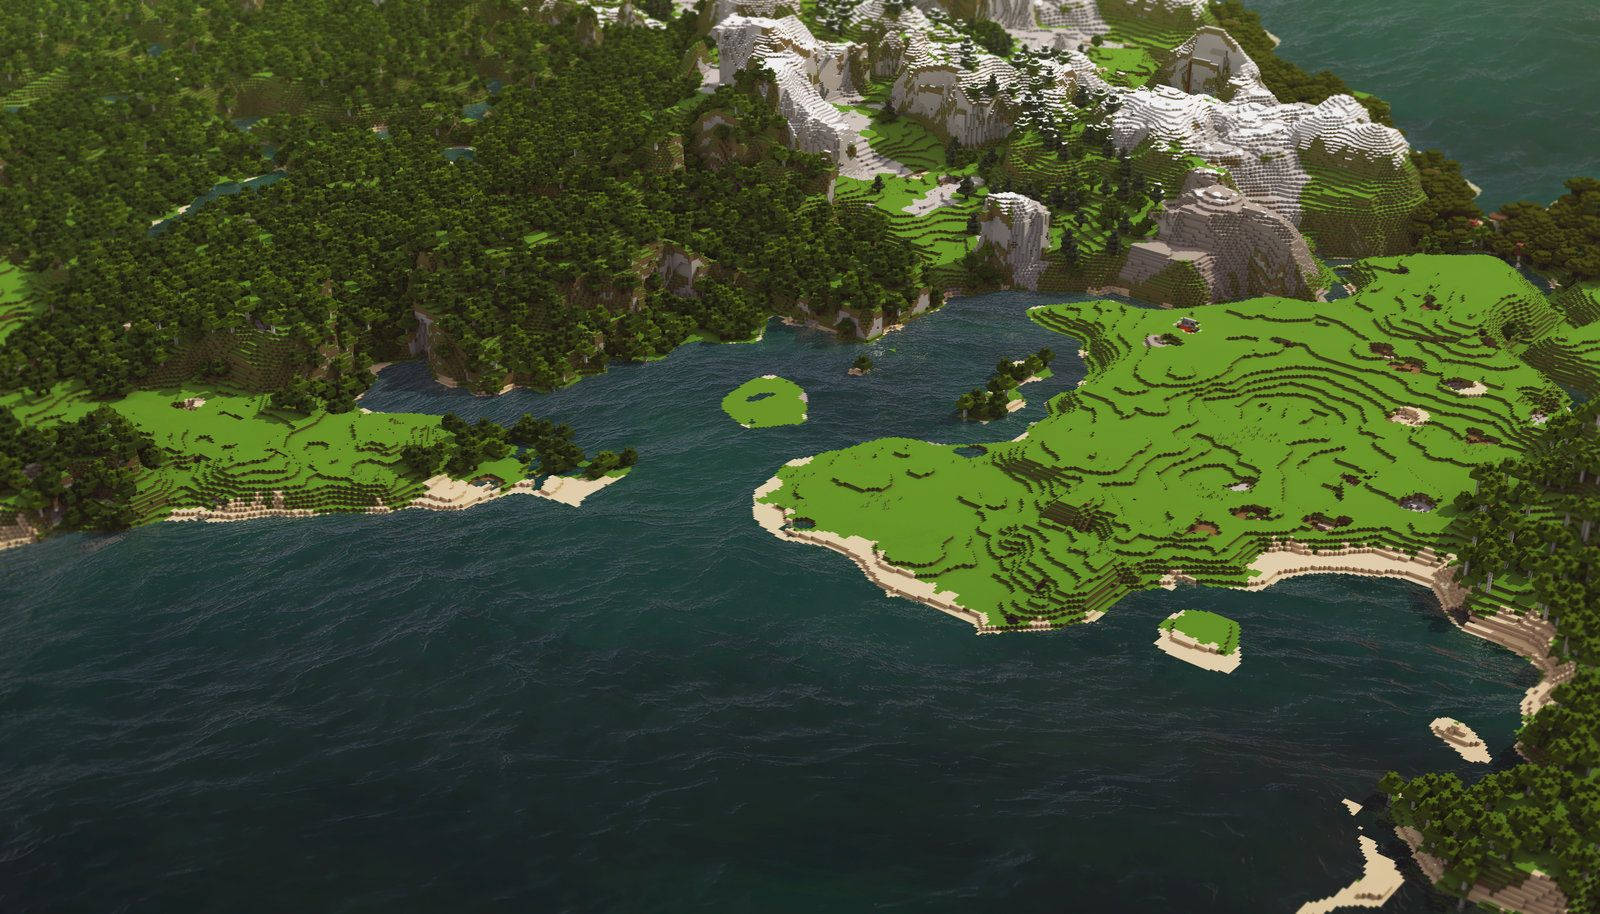 Realistic-looking Ocean In Minecraft Landscape Picture